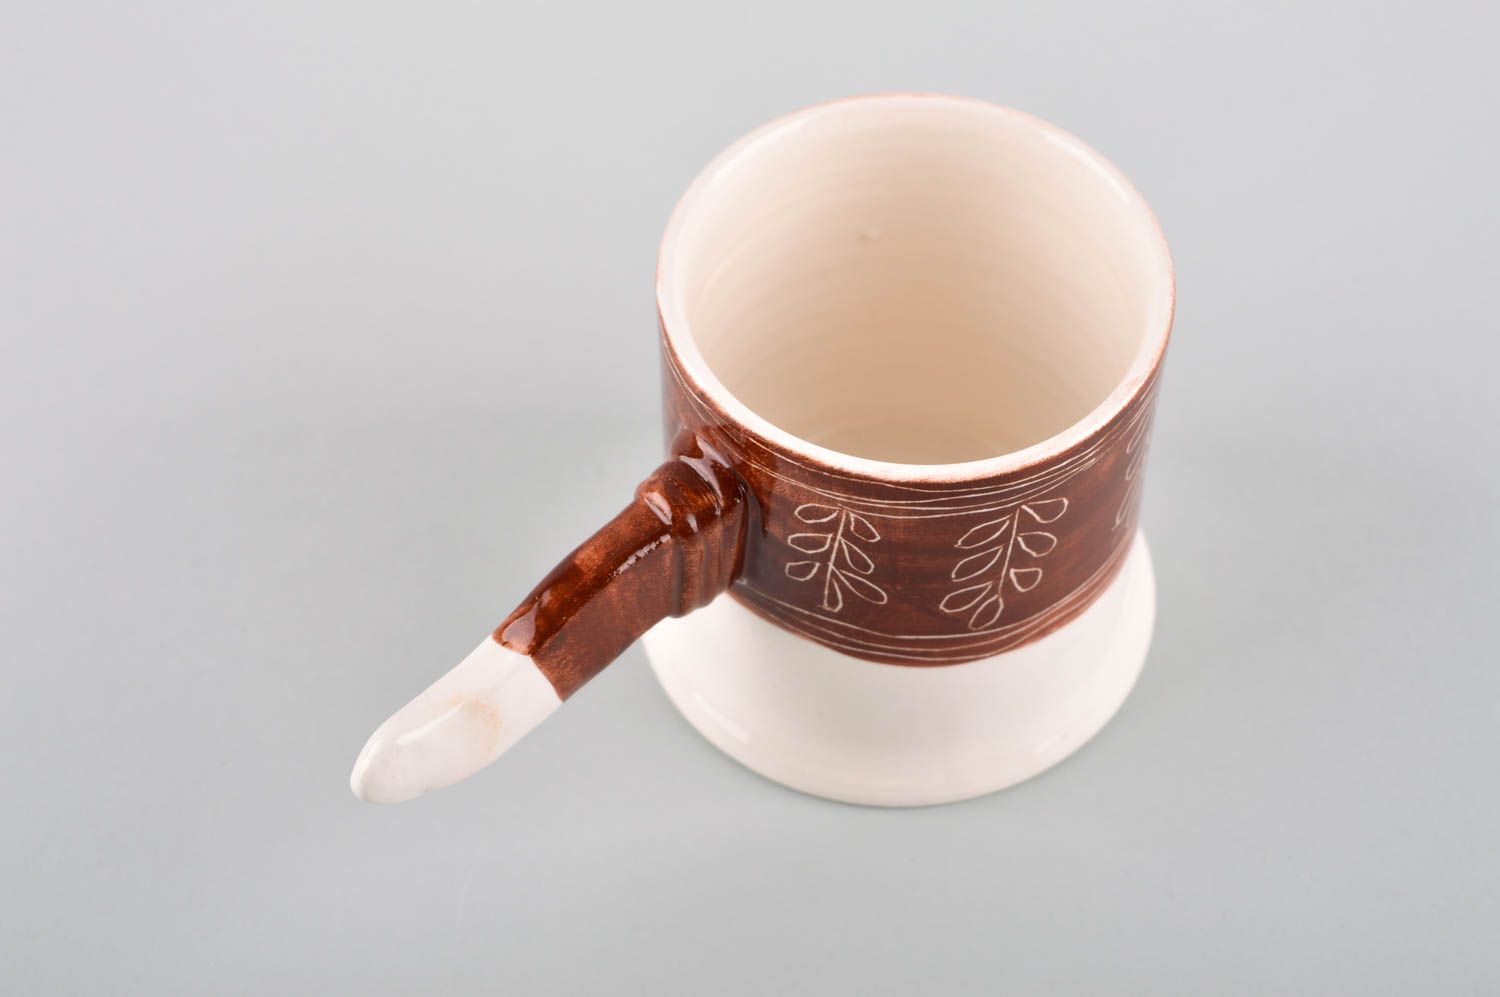 Teacup in white and brown cherry colors and non-standard handle in the shape of a stick photo 3